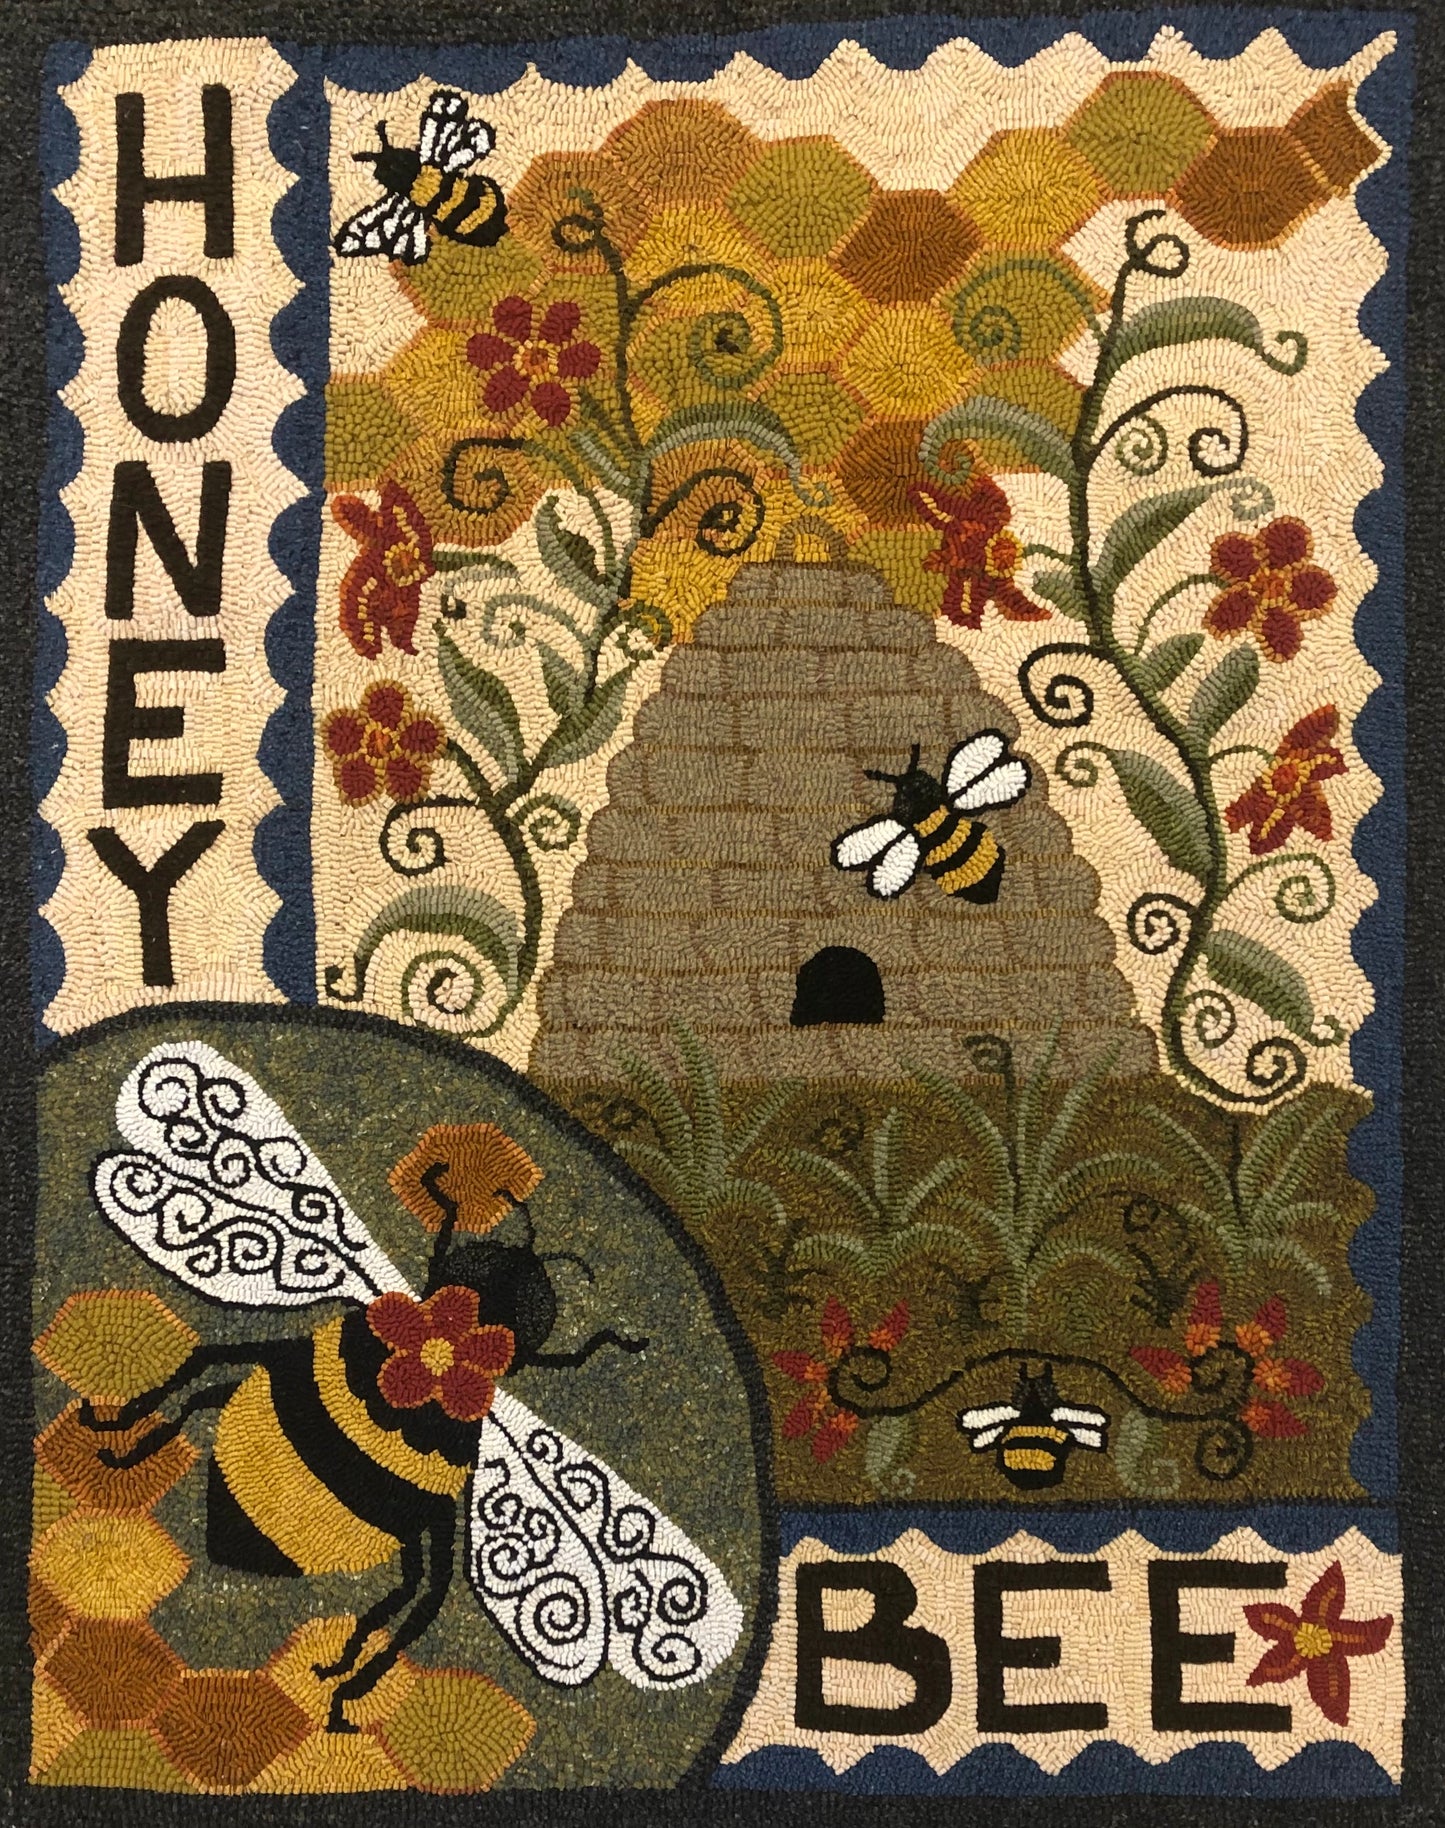 Honey Bee- Rug Hooking pattern on Linen designed by Kelly Kanyok of Orphaned Wool. This is a wonderful Bumblebee Pattern with a Bee Skep and Honeycombs background. The bee are enjoying all the flowers is this sweet design.